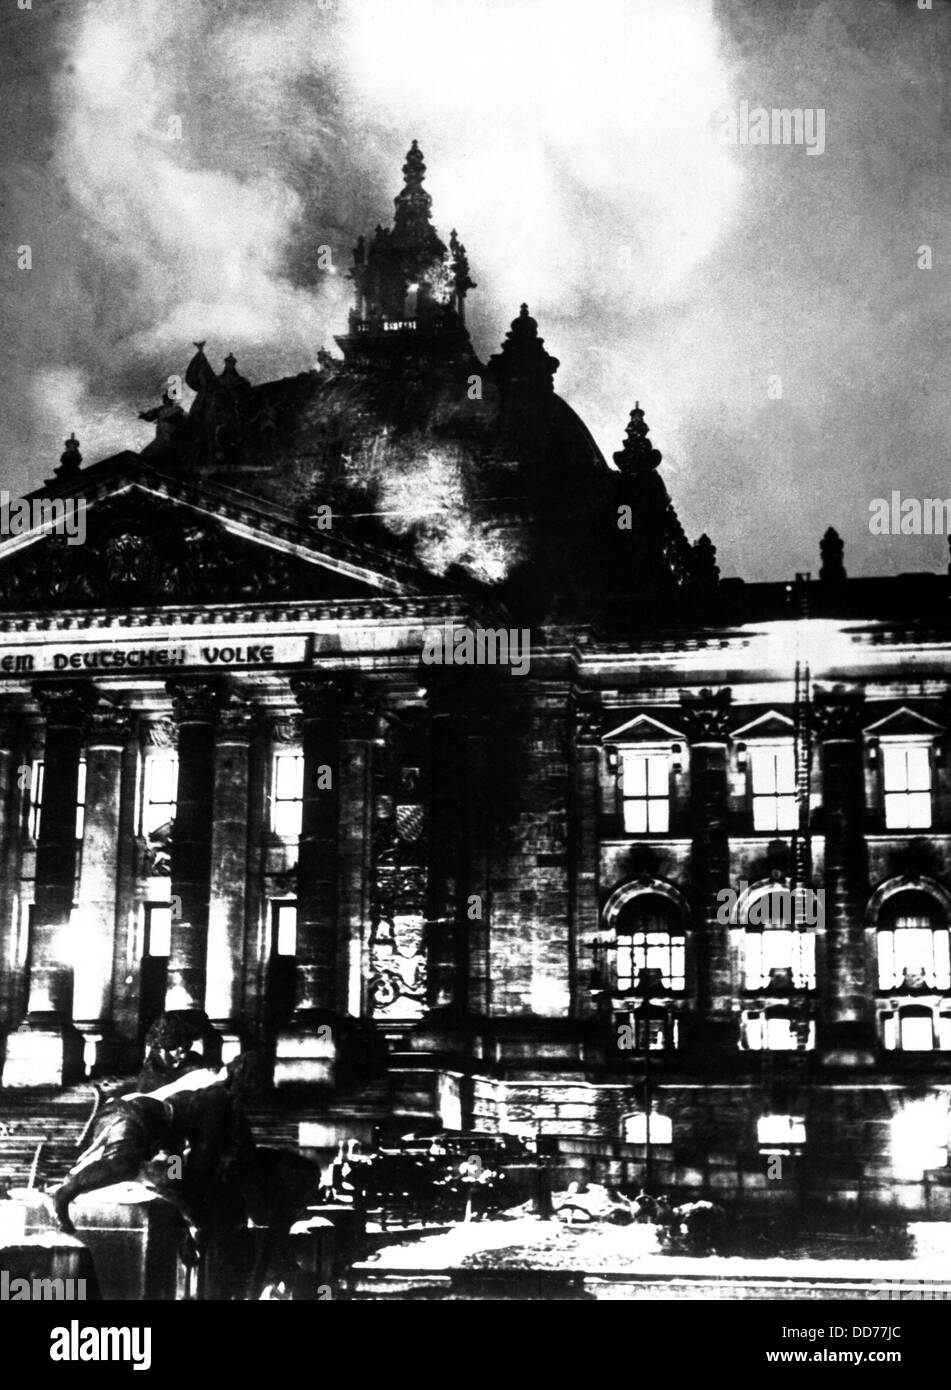 The burning Reichstag in February 27, 1933. The fire broke out simultaneously in 20 places, enabling Hitler to seize power Stock Photo